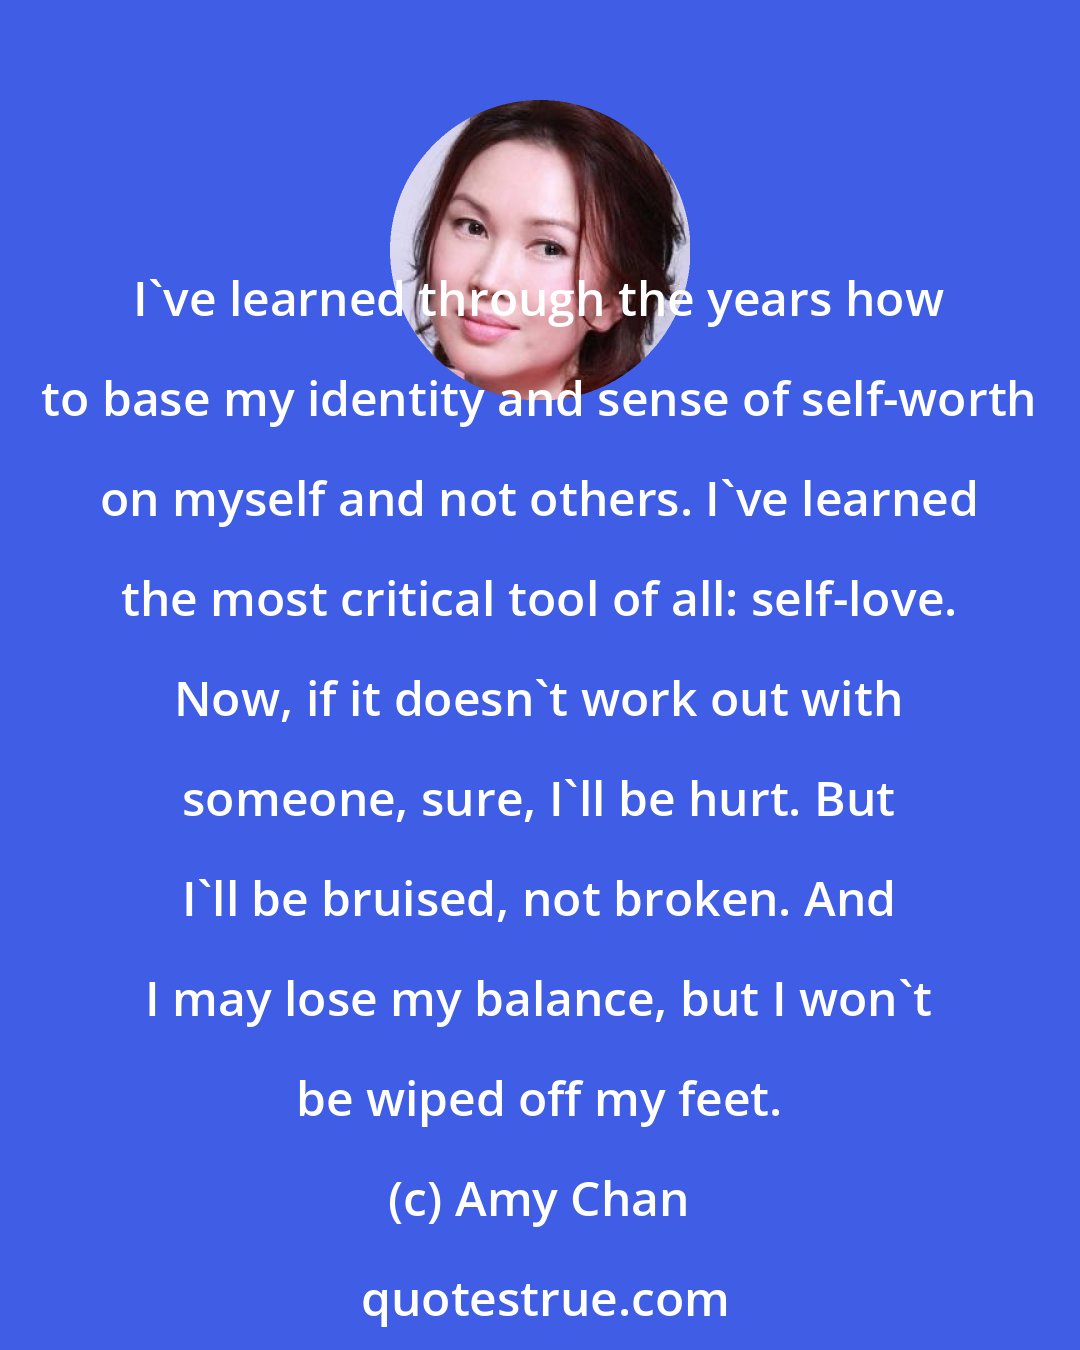 Amy Chan: I've learned through the years how to base my identity and sense of self-worth on myself and not others. I've learned the most critical tool of all: self-love. Now, if it doesn't work out with someone, sure, I'll be hurt. But I'll be bruised, not broken. And I may lose my balance, but I won't be wiped off my feet.